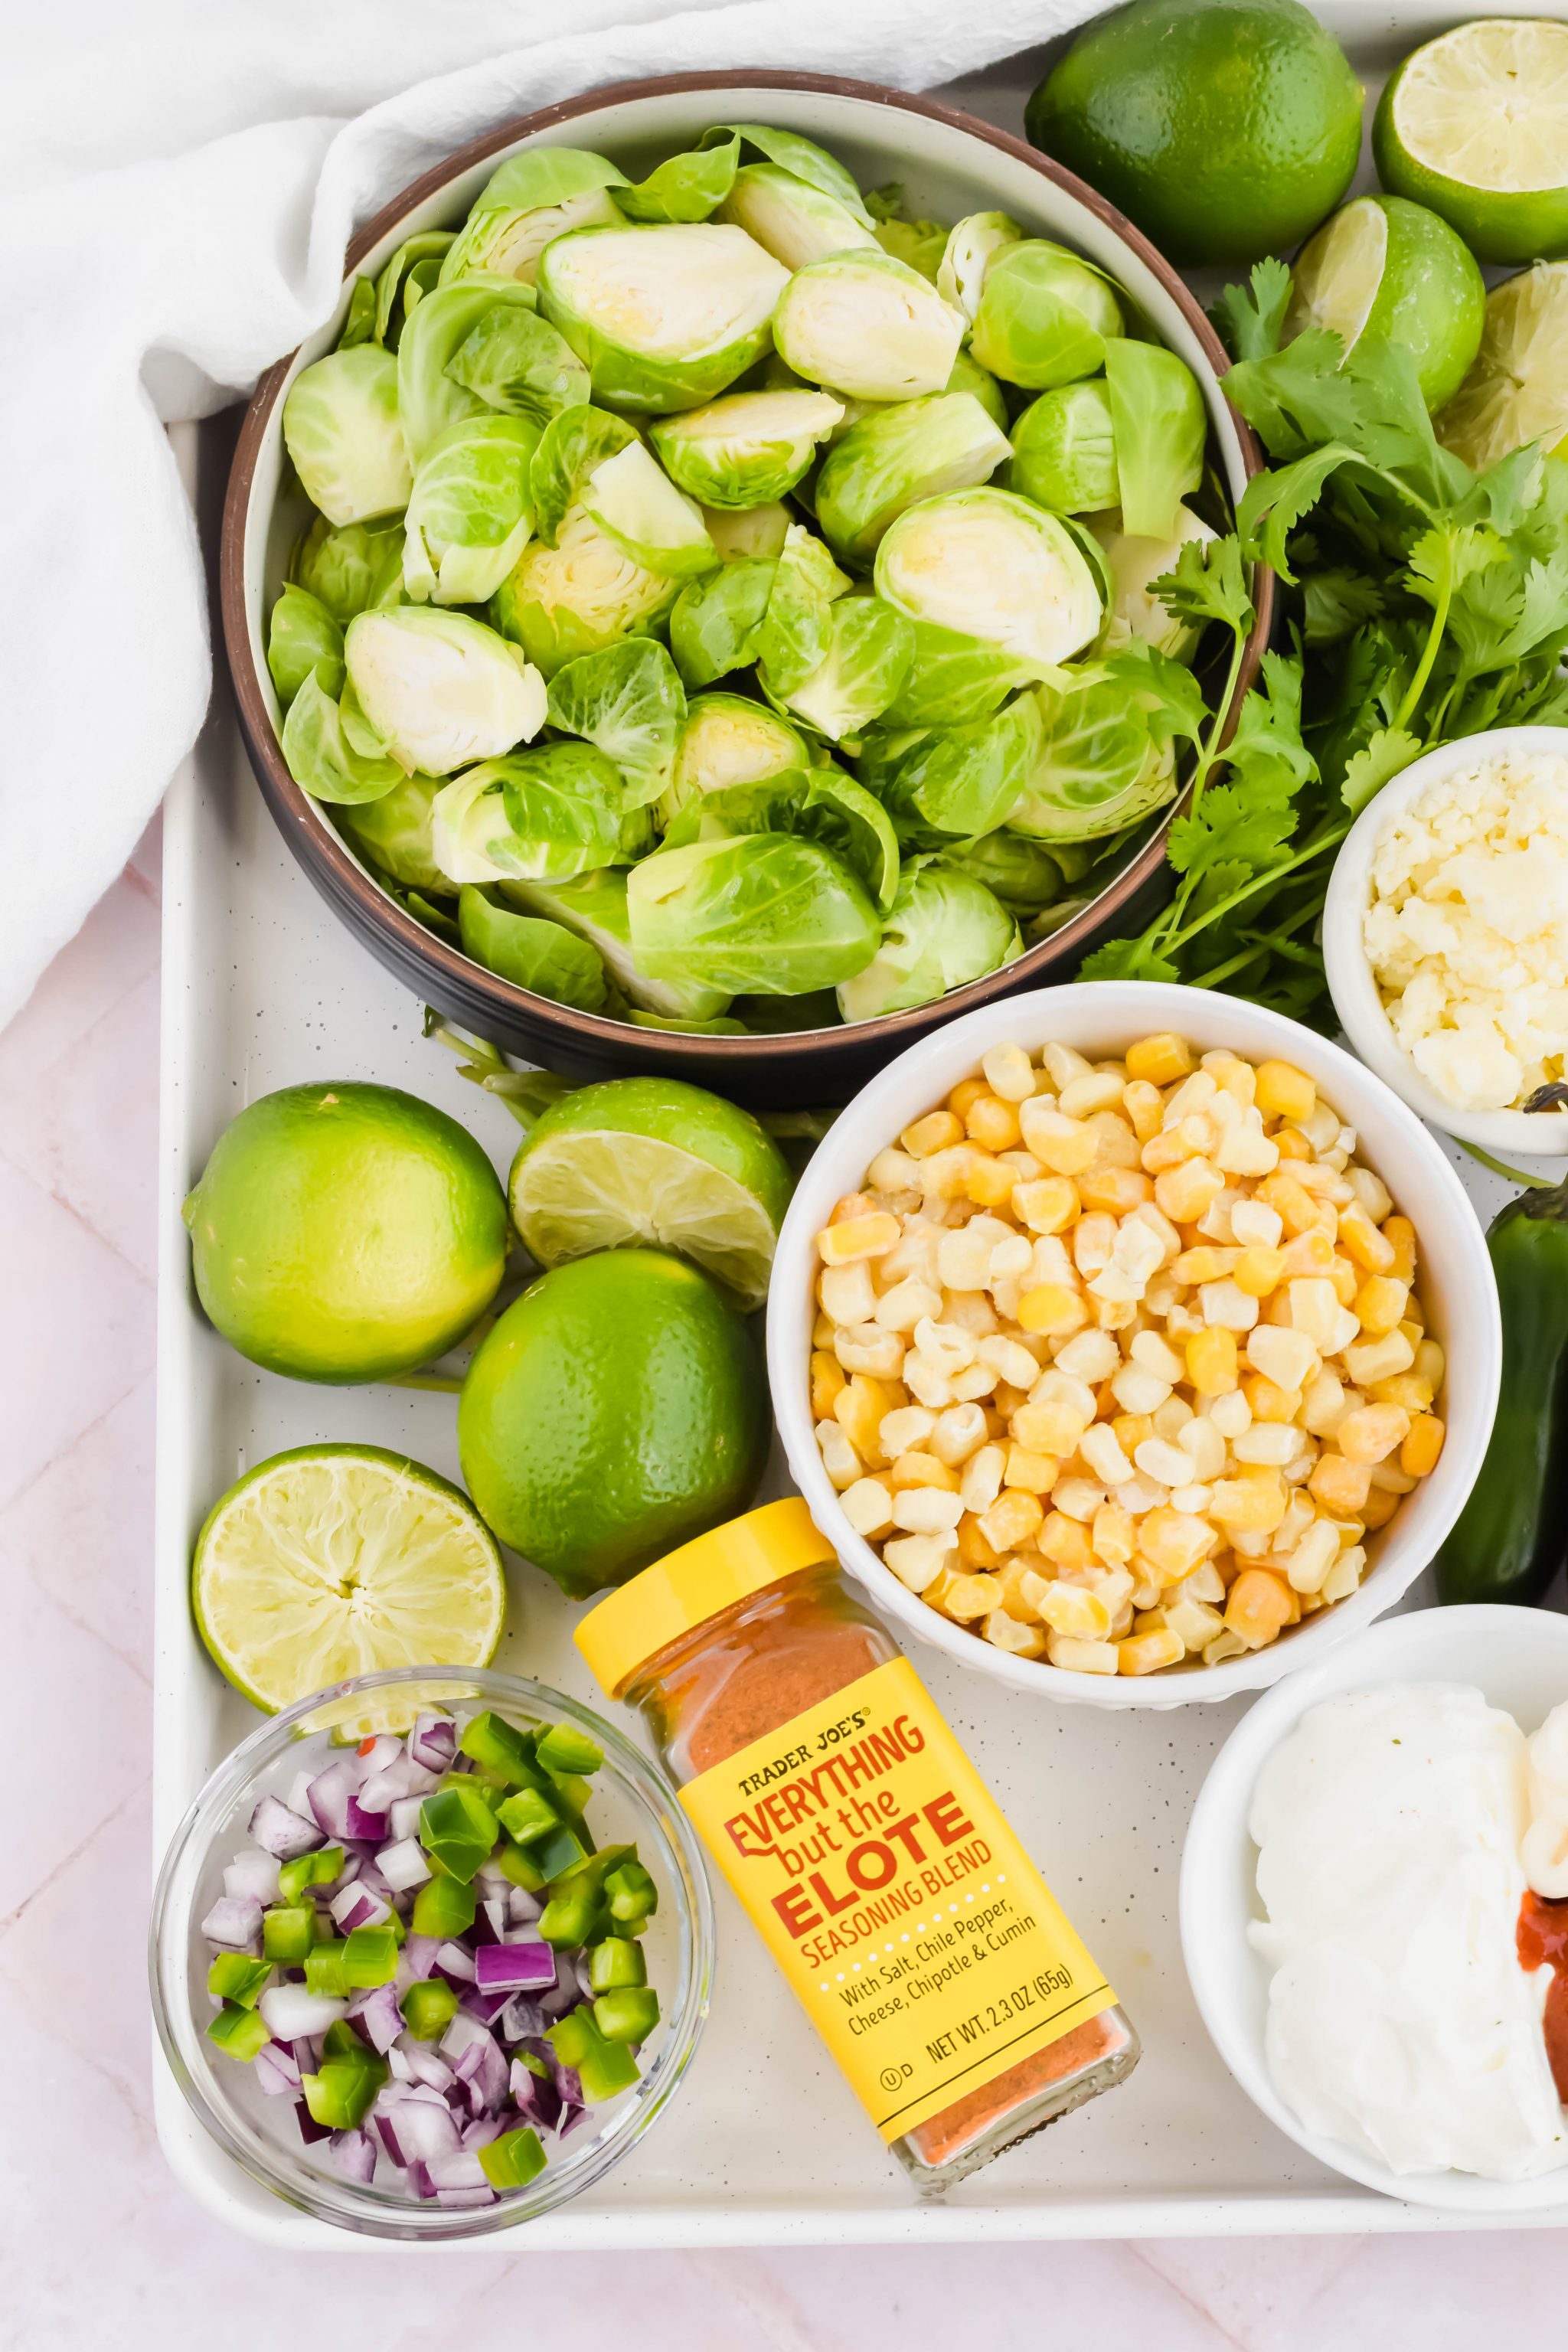 Street corn mexican brussel sprout recipe ingredients on white baking sheet.